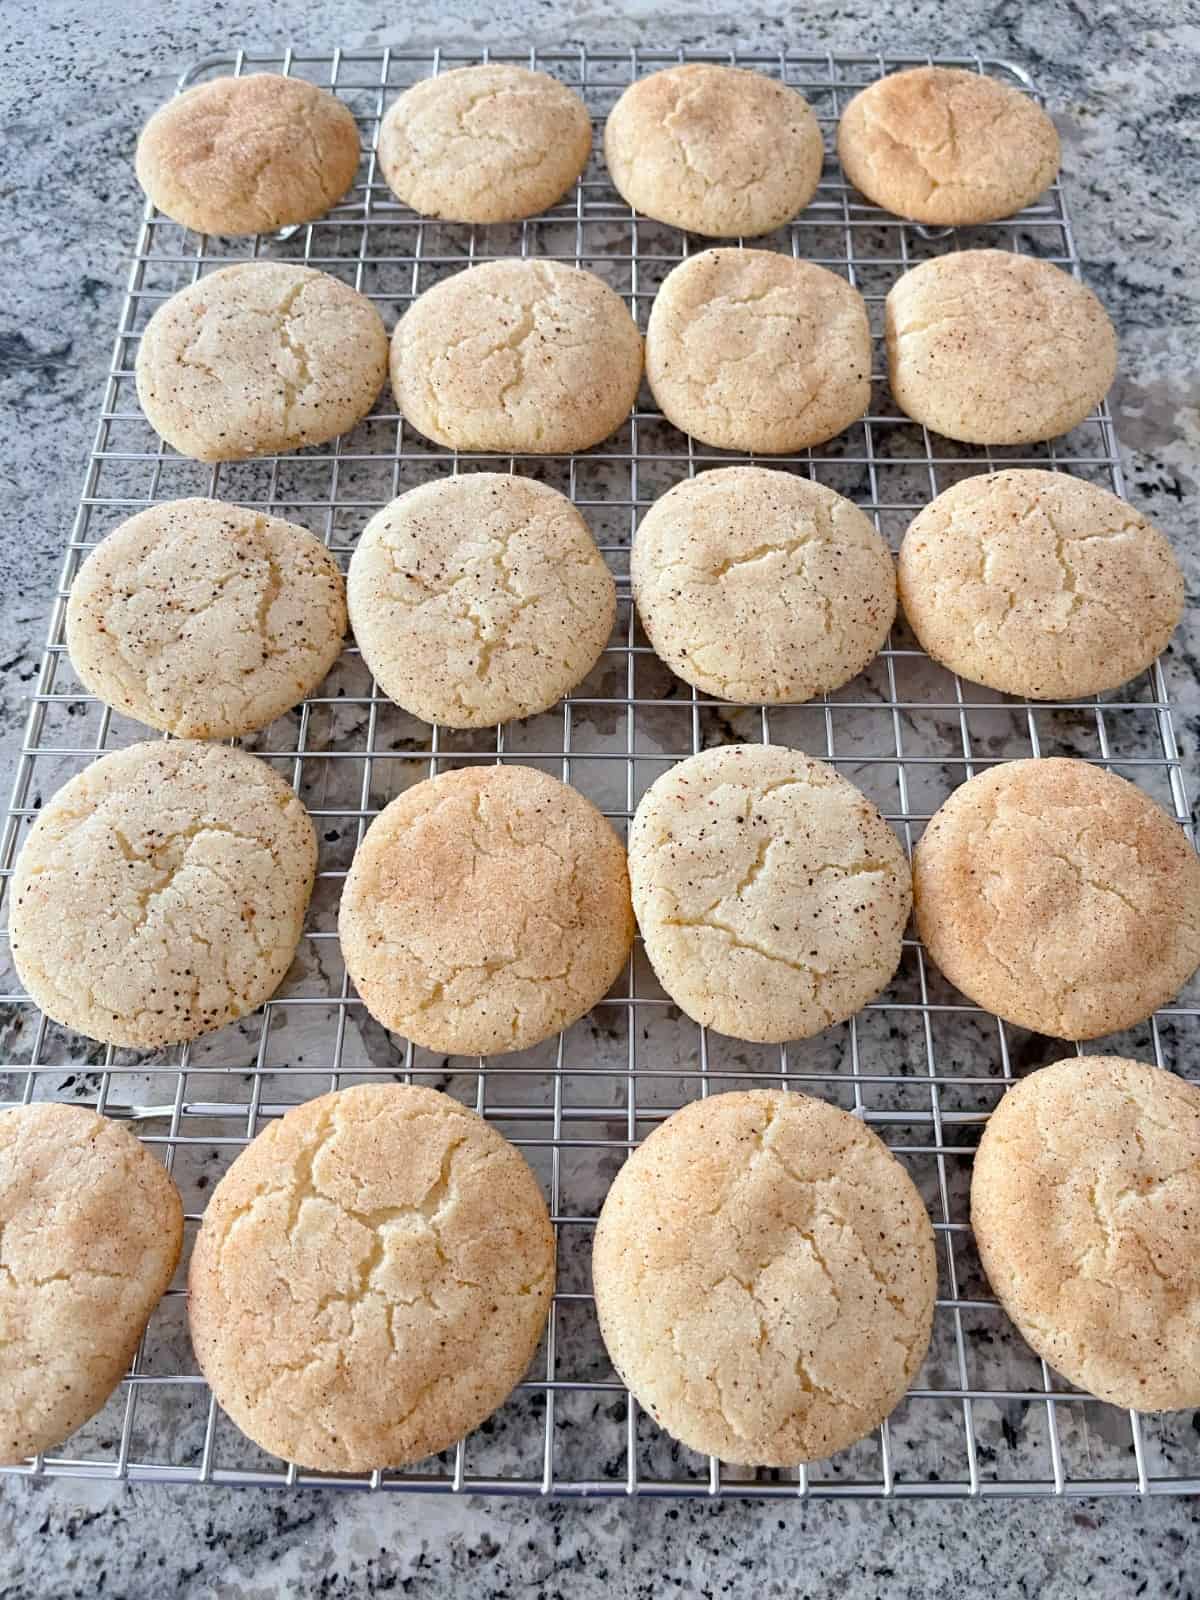 Fresh baked eggnog snickerdoodle cookies cooling on wire rack.